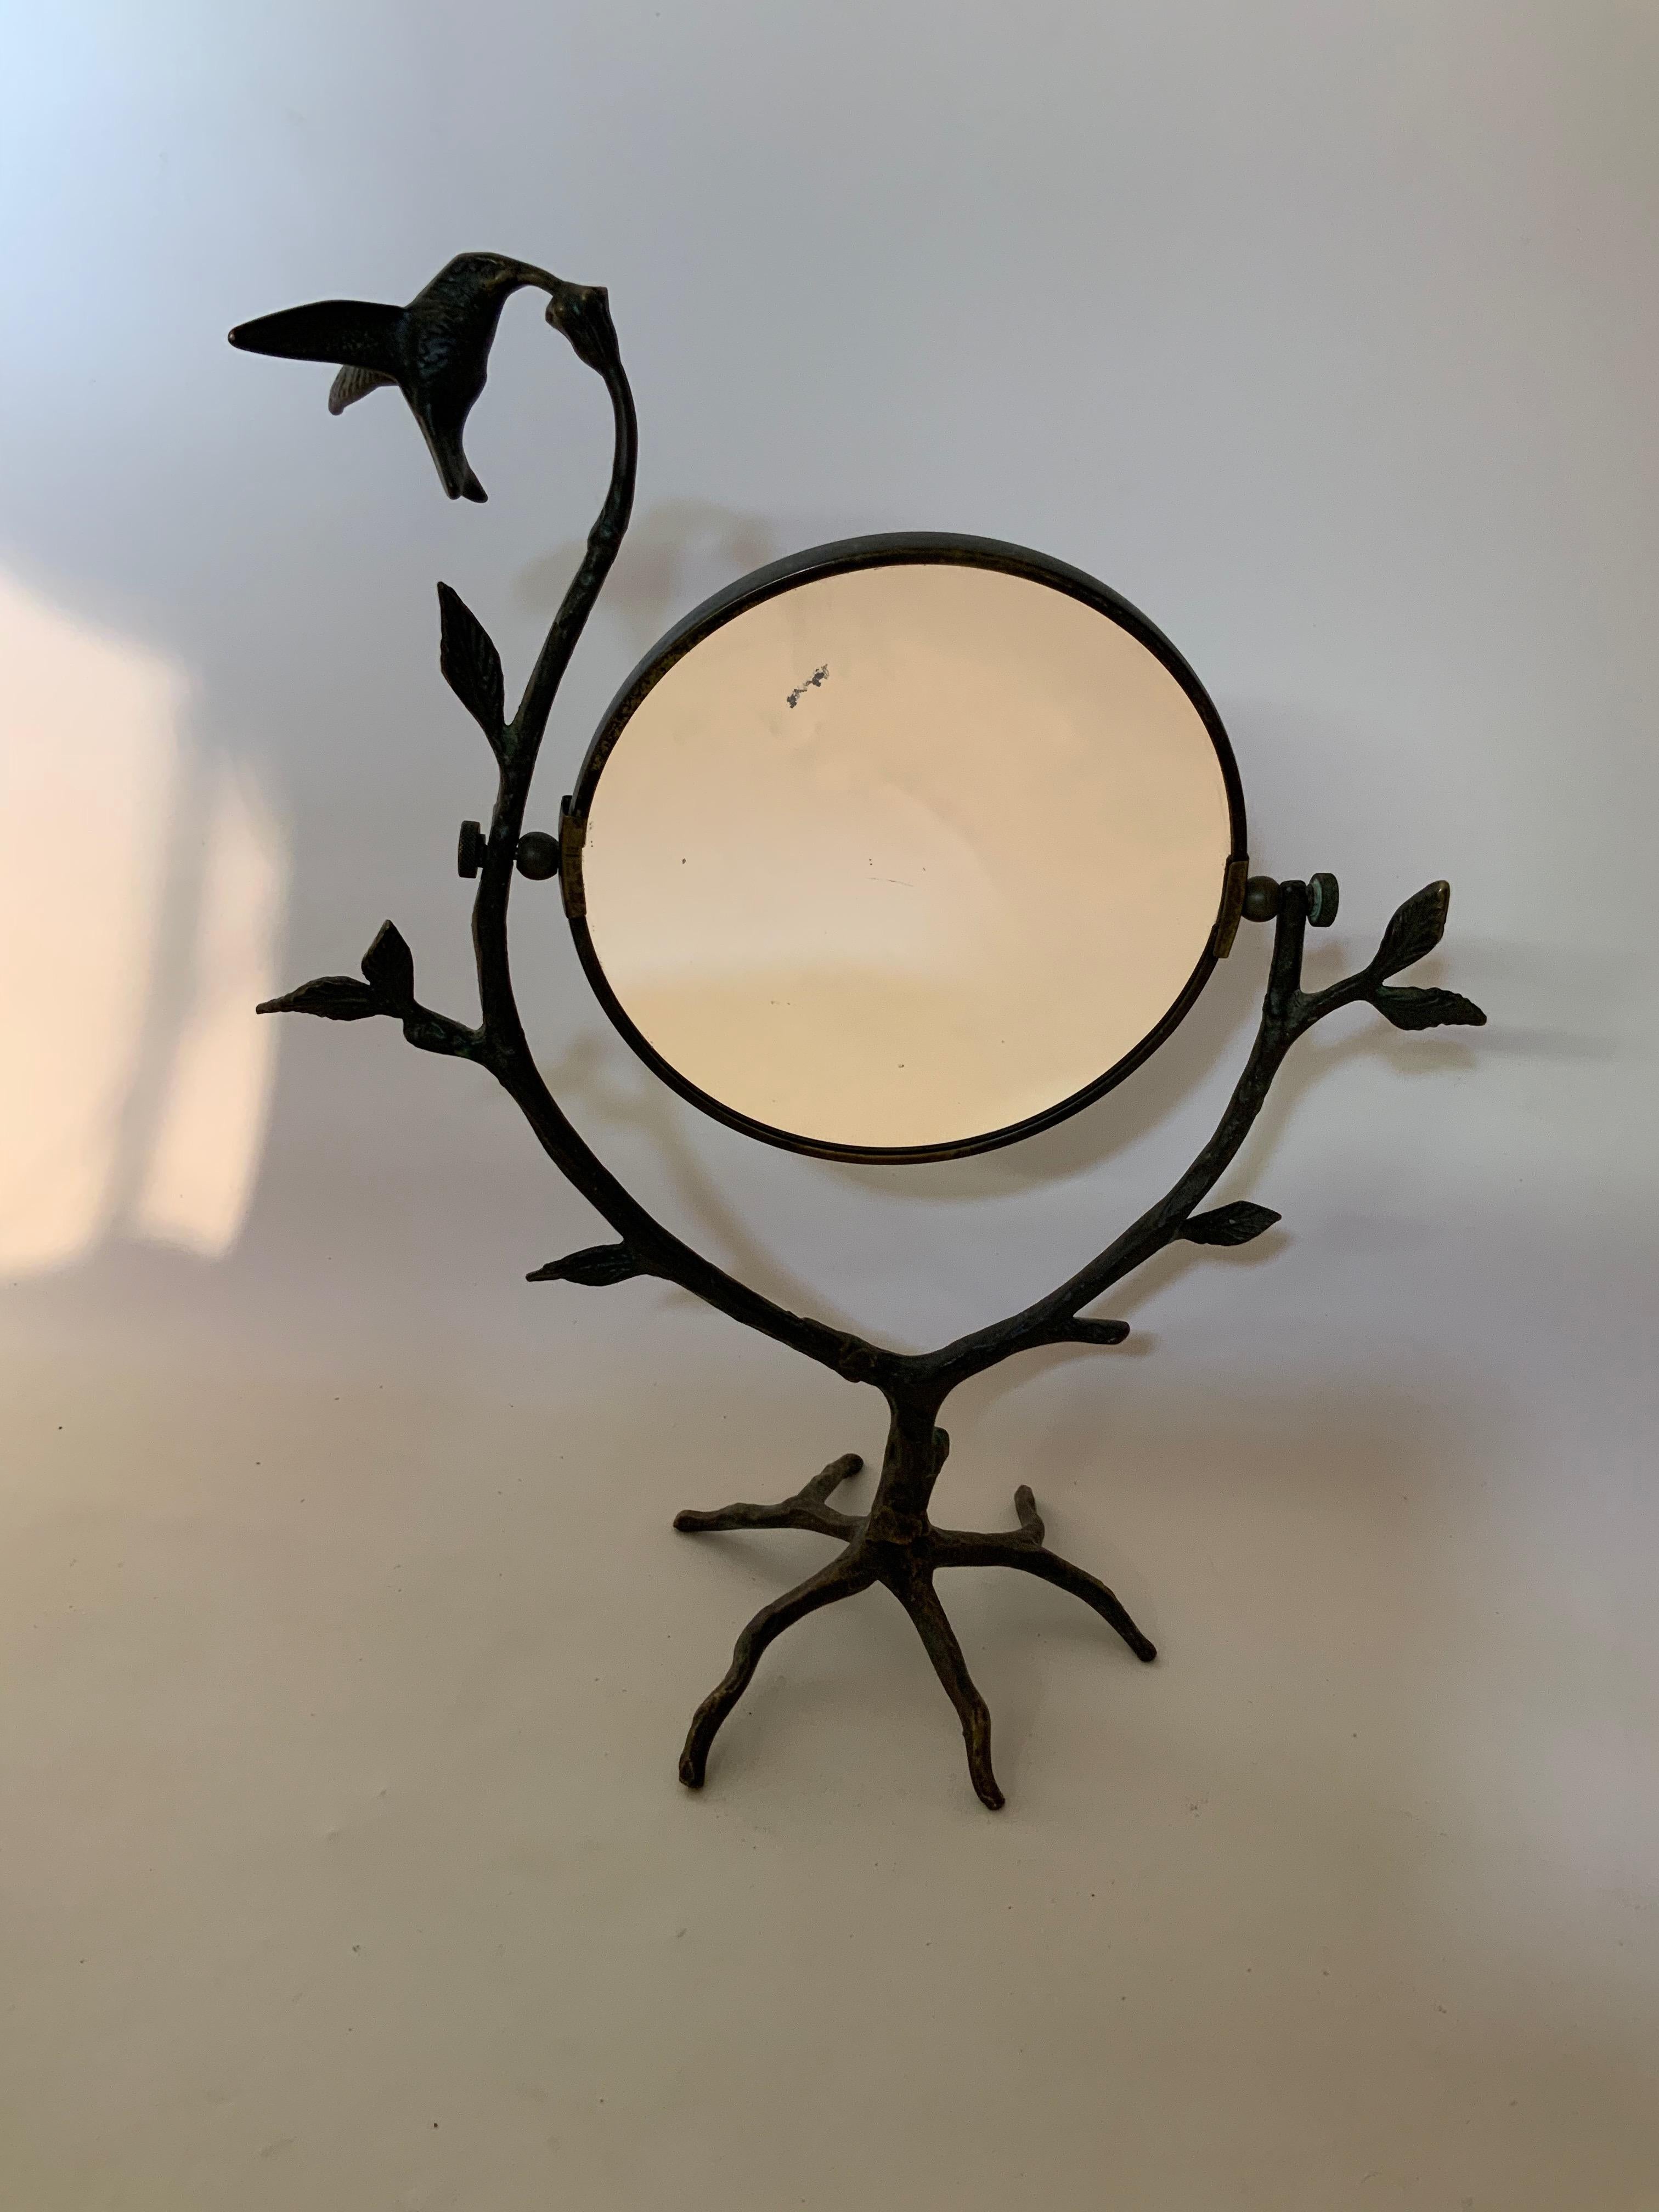 Unique cast bronze tabletop mirror in the matter of Giacometti. This beautiful tabletop mirror features a leaf and branch base with a hummingbird. The mirror can be angled and adjusted, circa 1960-1970. Placement in your entryway, vanity, bedroom,